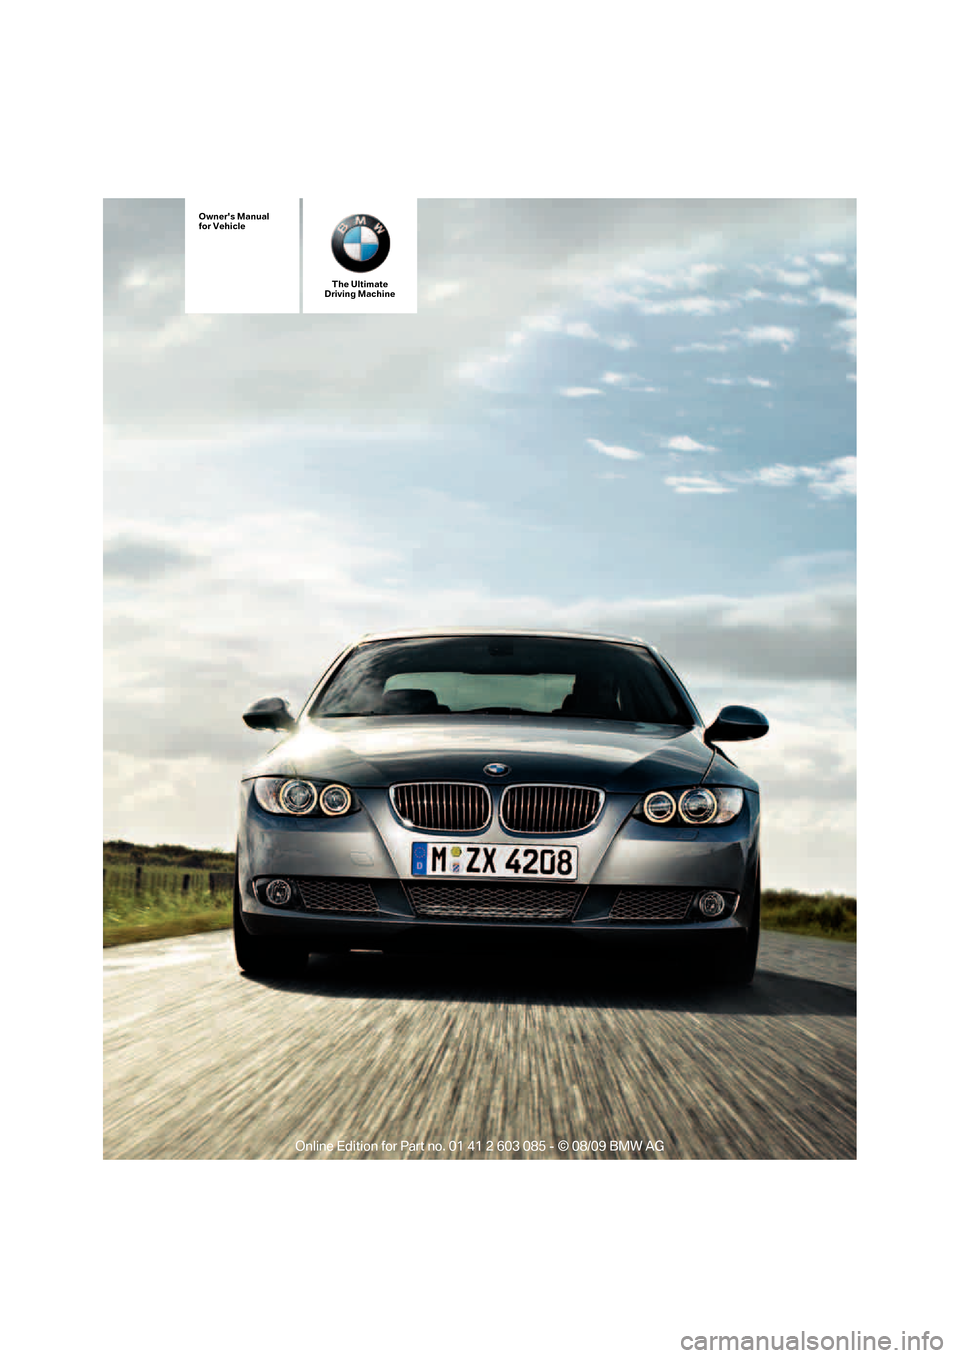 BMW 328I CONVERTIBLE 2010 E93 Owners Manual The Ultimate
Driving Machine
Owners Manual
for Vehicle 